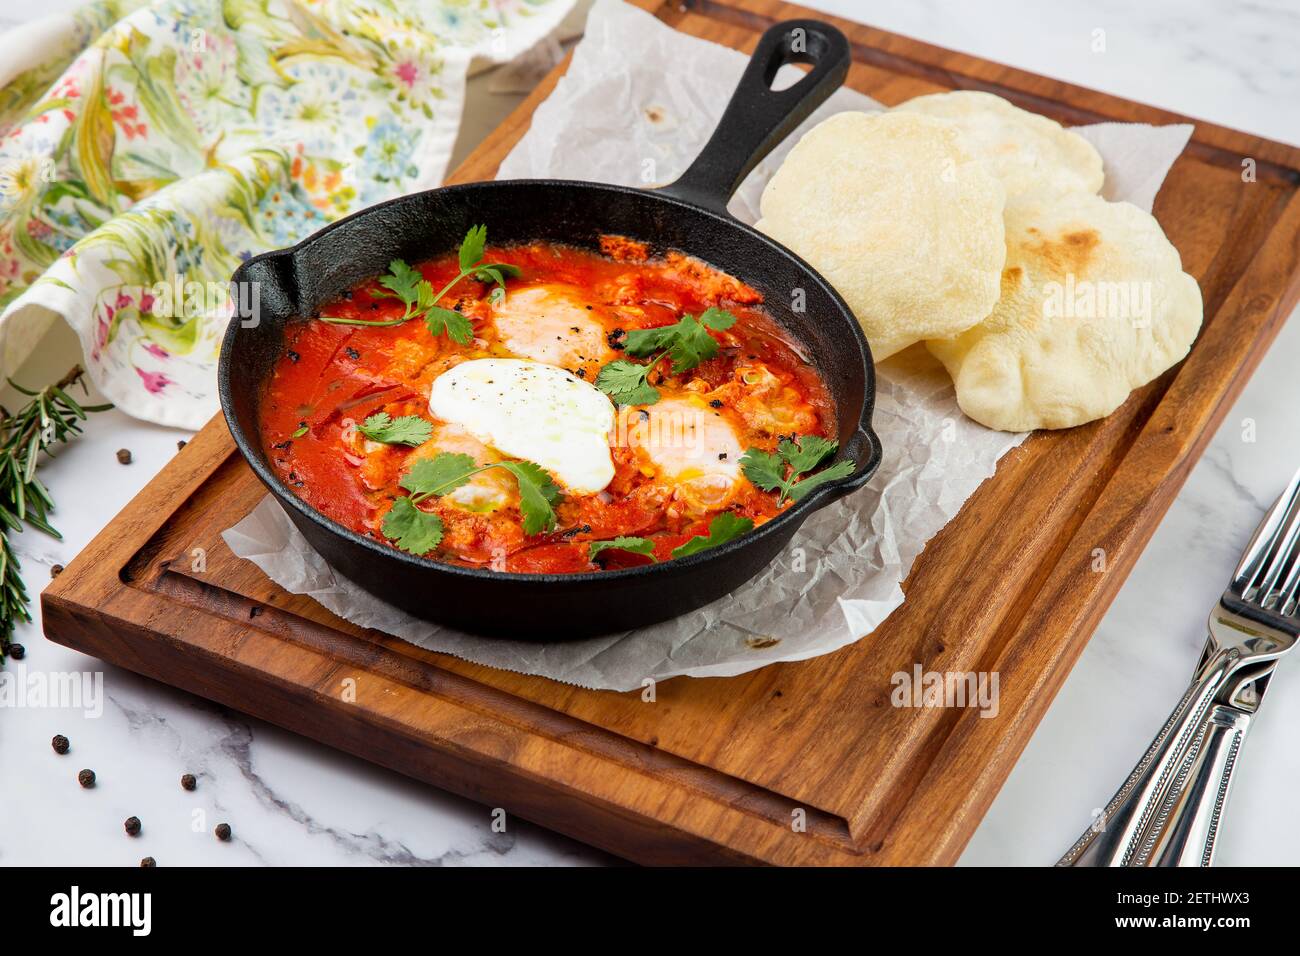 shakshuka - scrambled eggs with herbs, beans and tomatoes in a skillet with lean crispbread Stock Photo